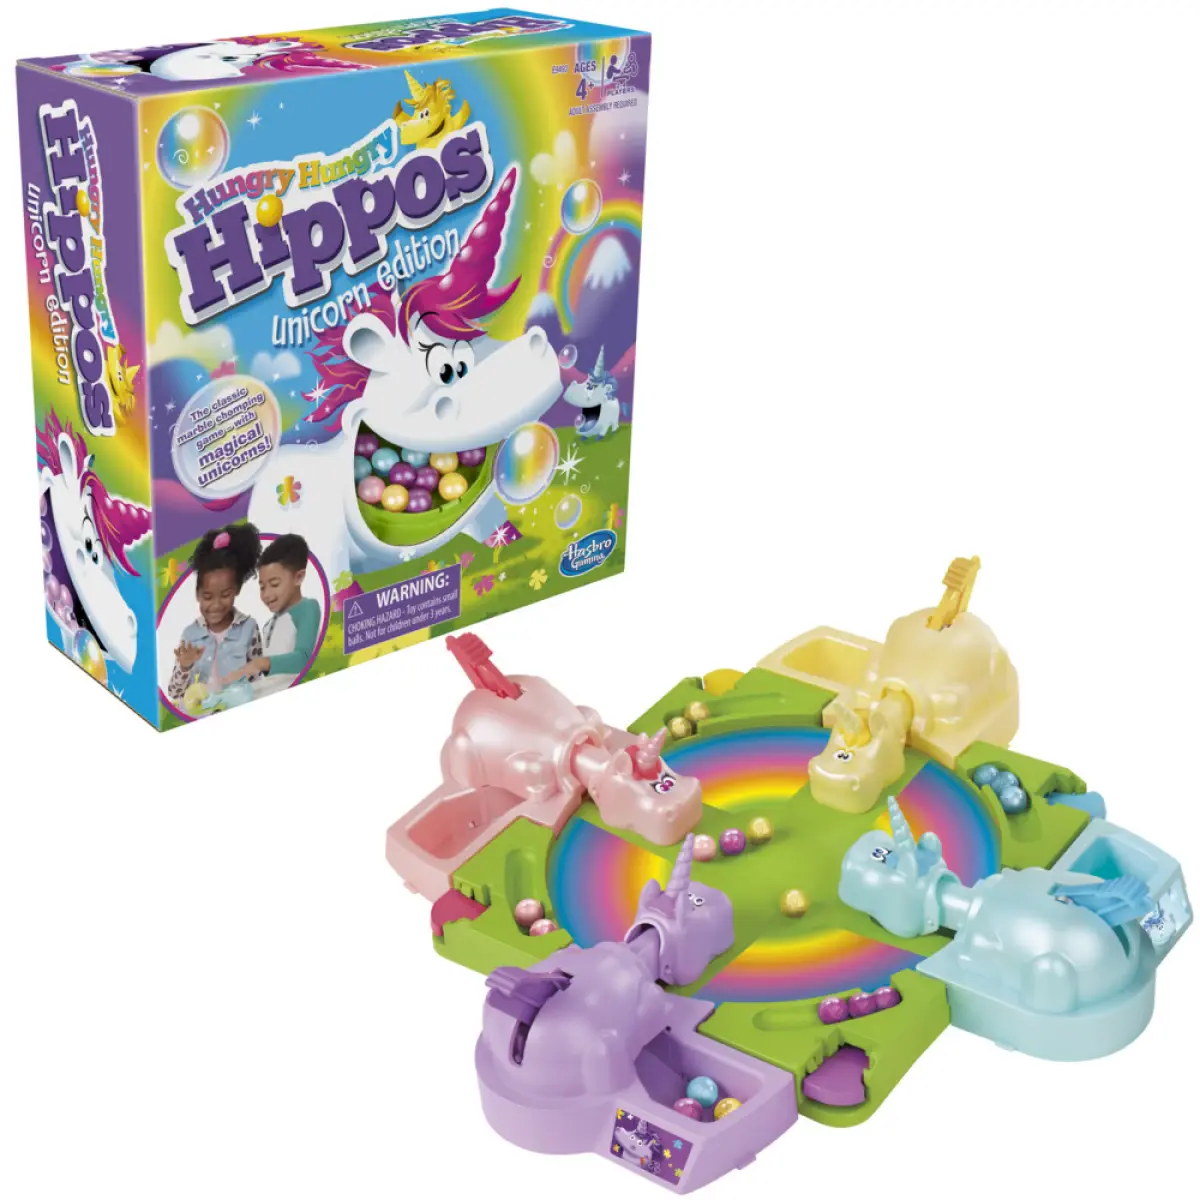 Hungry Hungry Hippos Unicorn Edition Board Game For Kids, Preschool Games For Kids Ages 4 And Up, Kids Games For 2 To 4 Players